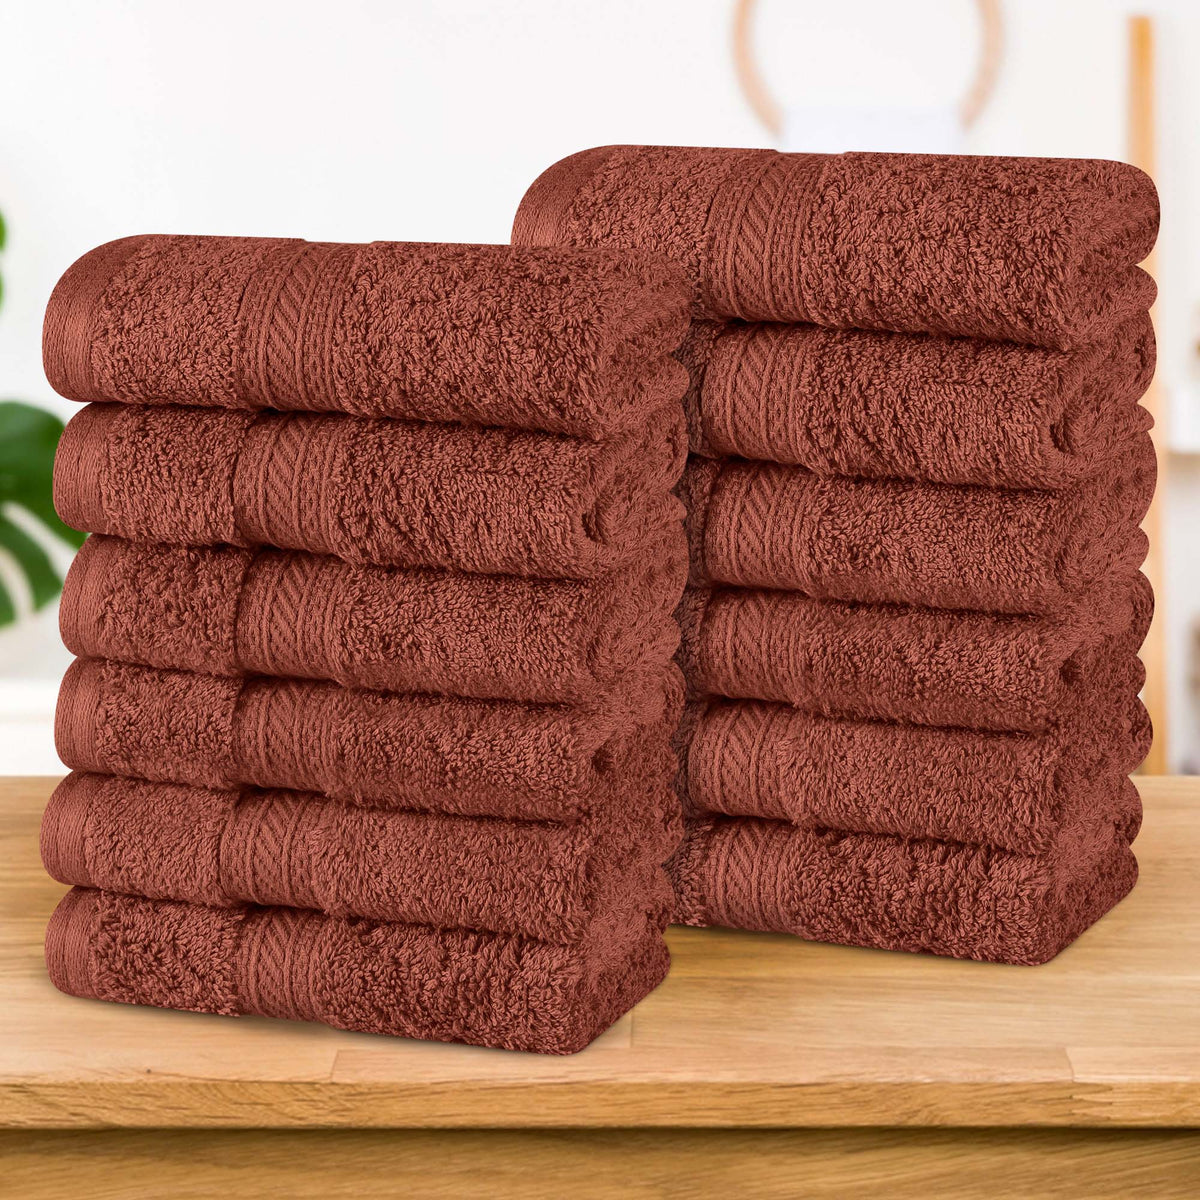 Atlas Combed Cotton Highly Absorbent Solid Face Towels / Washcloths Set of 12 - Hot Chocolate